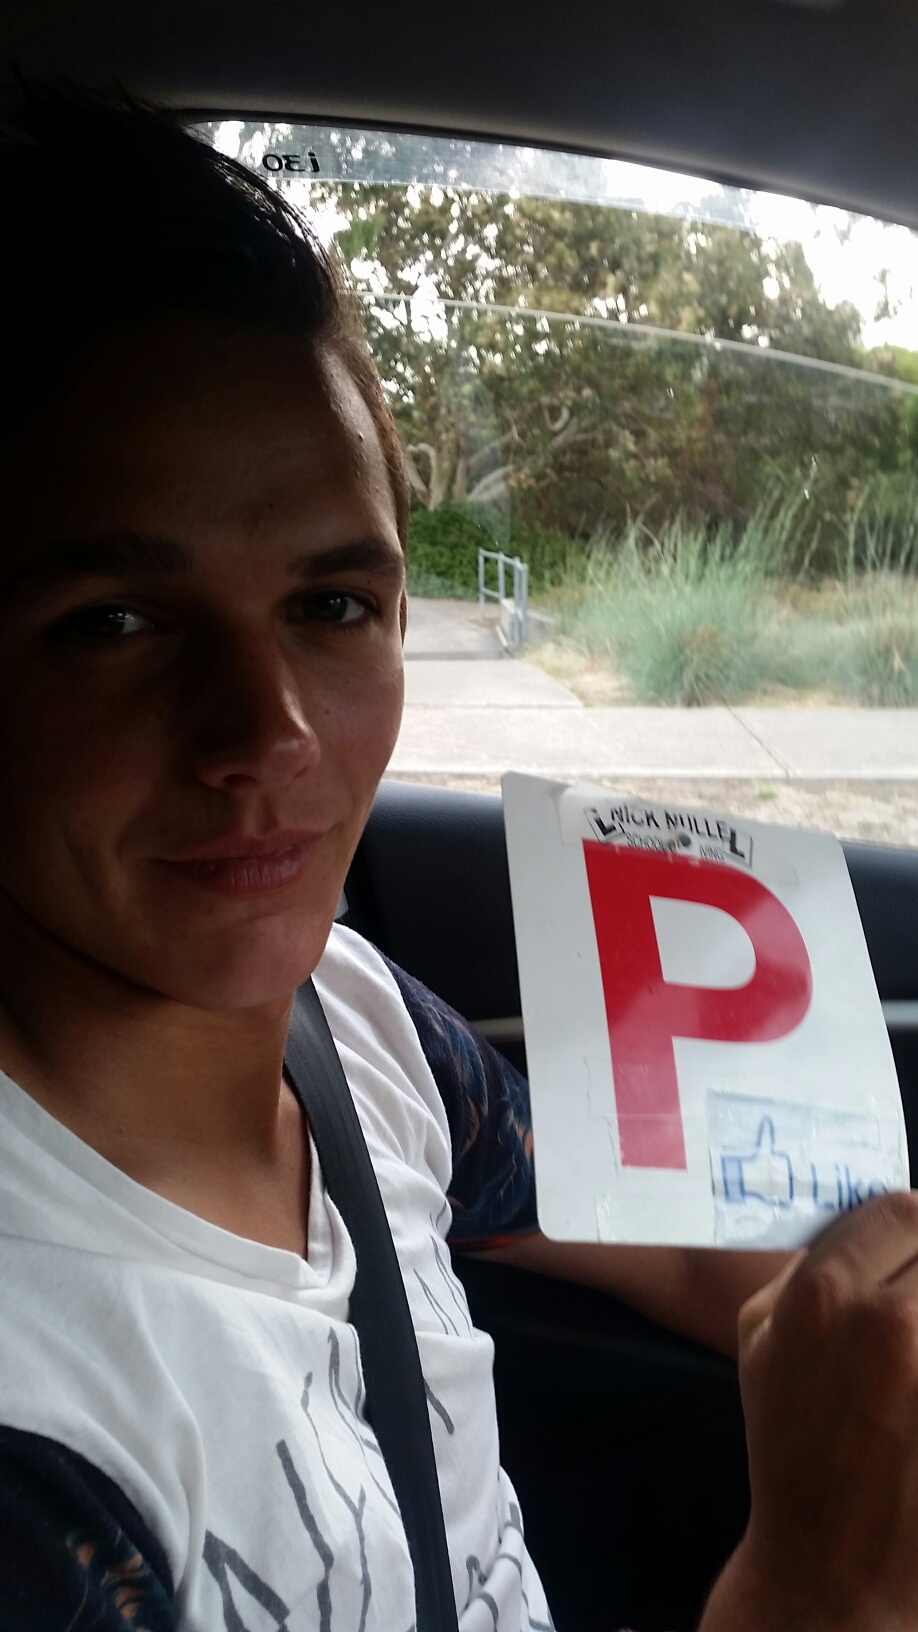 Nick Nulle School Of Driving Your Local Driving School